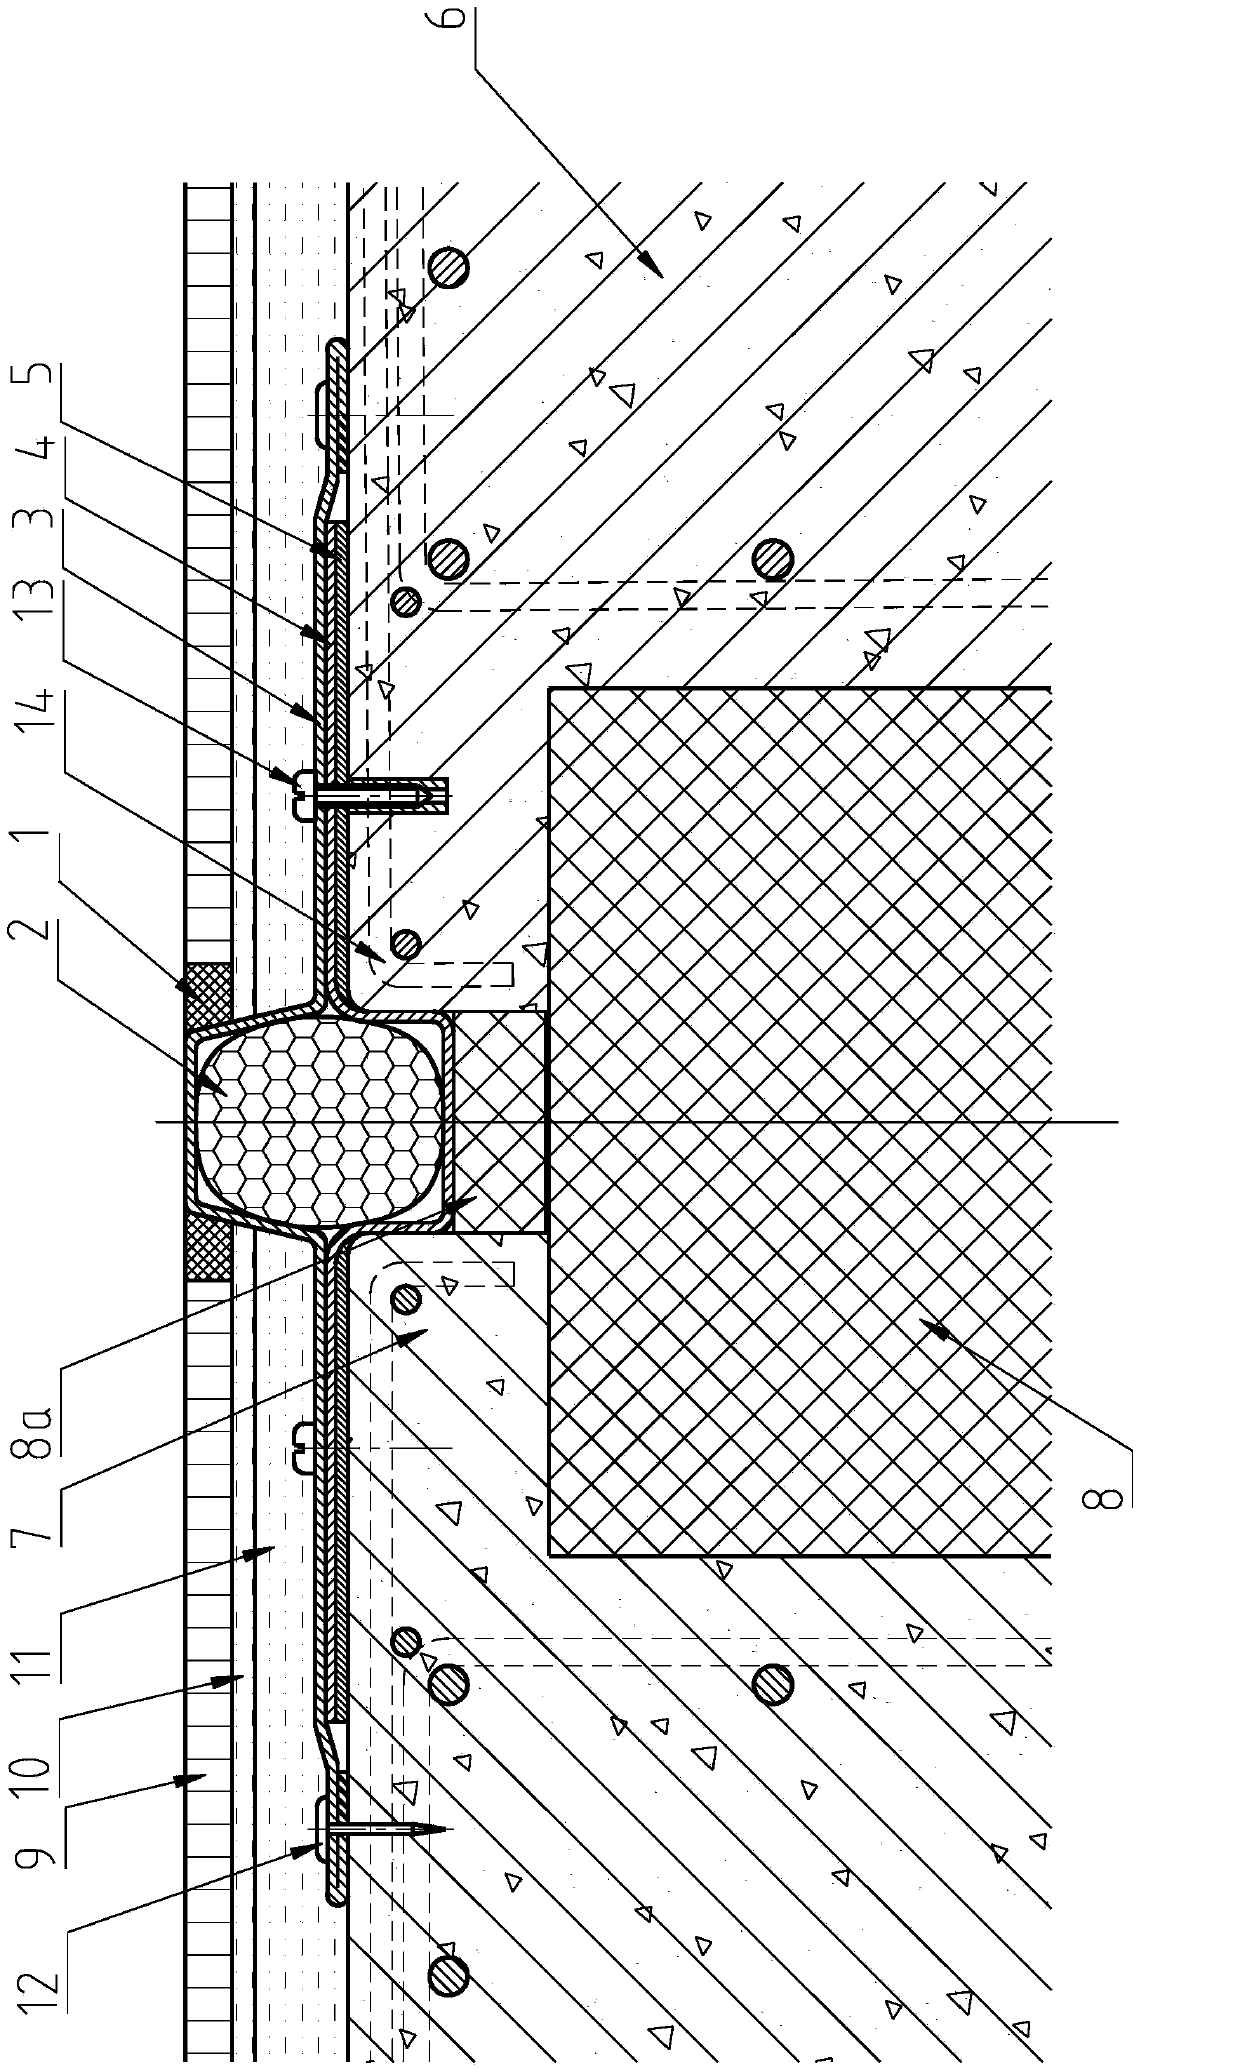 Quakeproof bed joint water-proof structure for outside hall of high-rise building and construction method